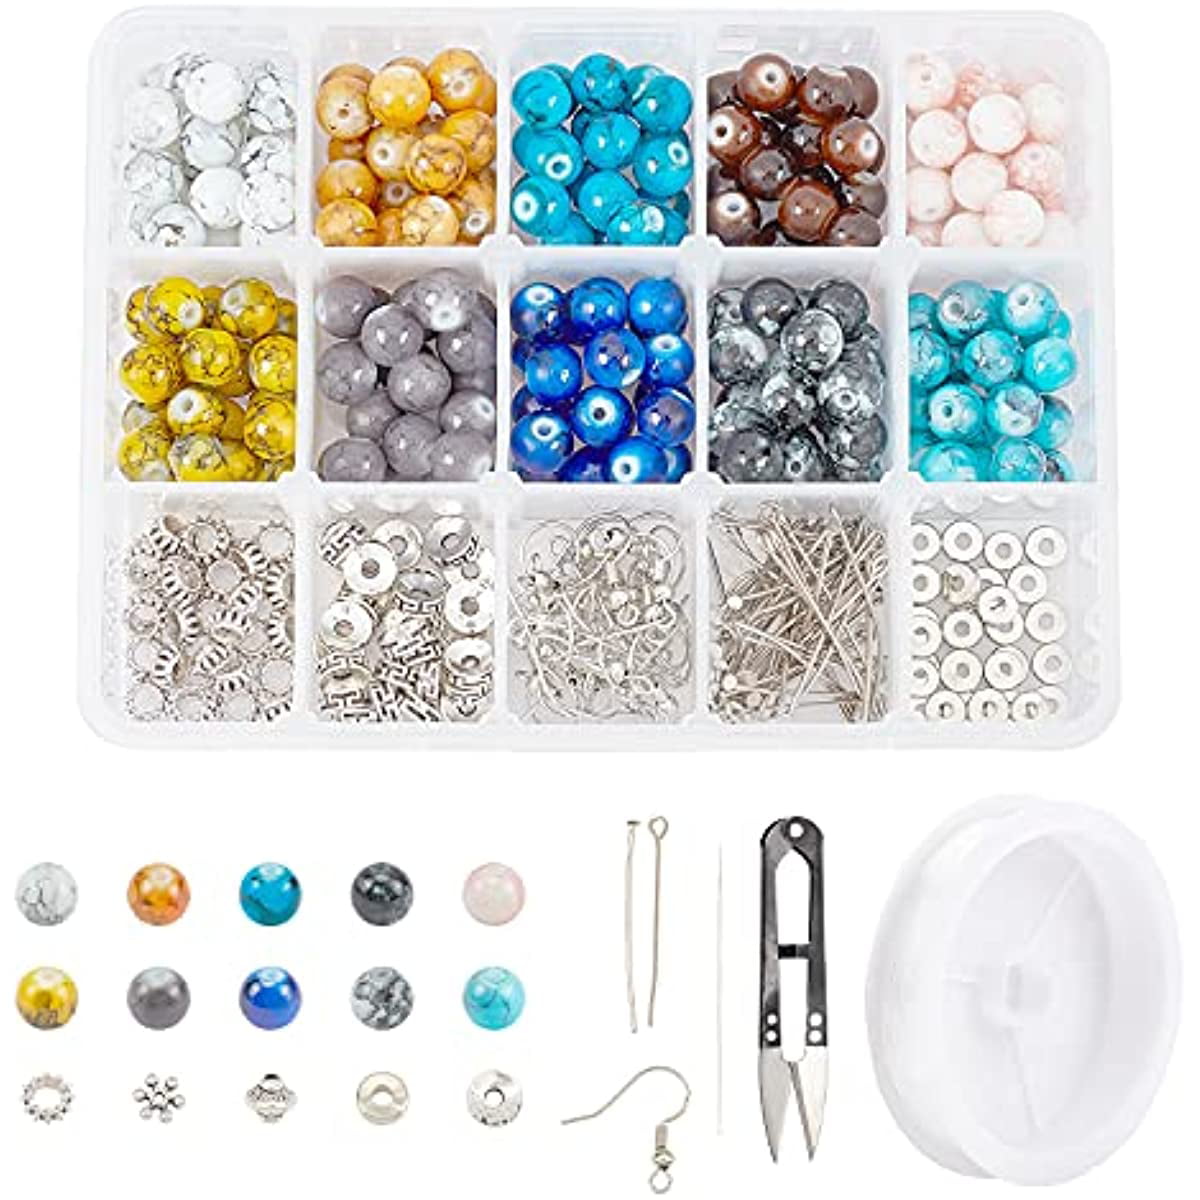 5800Pcs 3mm Seed Beads Started ,Small Craft Beads with Beading , and  Elastic String for DIY Bracelet Necklace Jewelry Making Supplies 